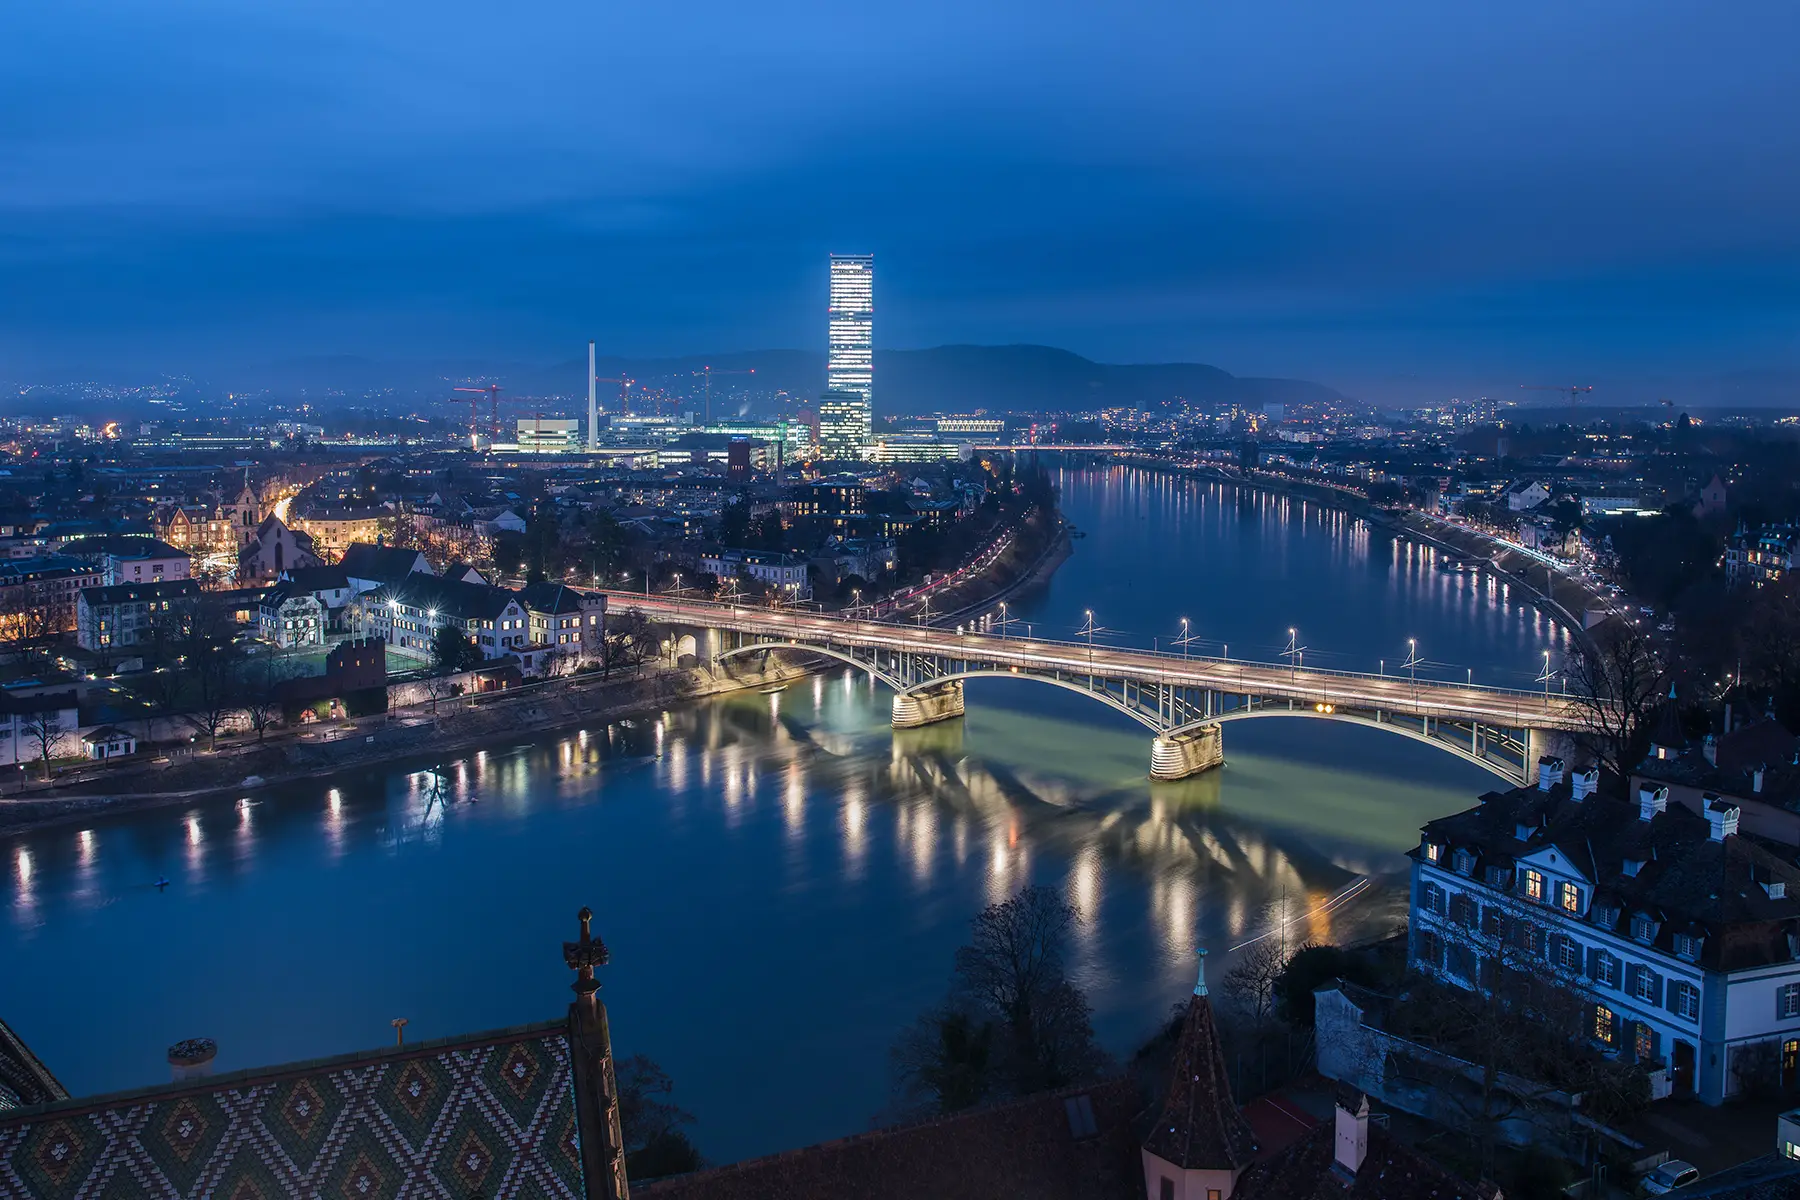 The Basel skyline at night